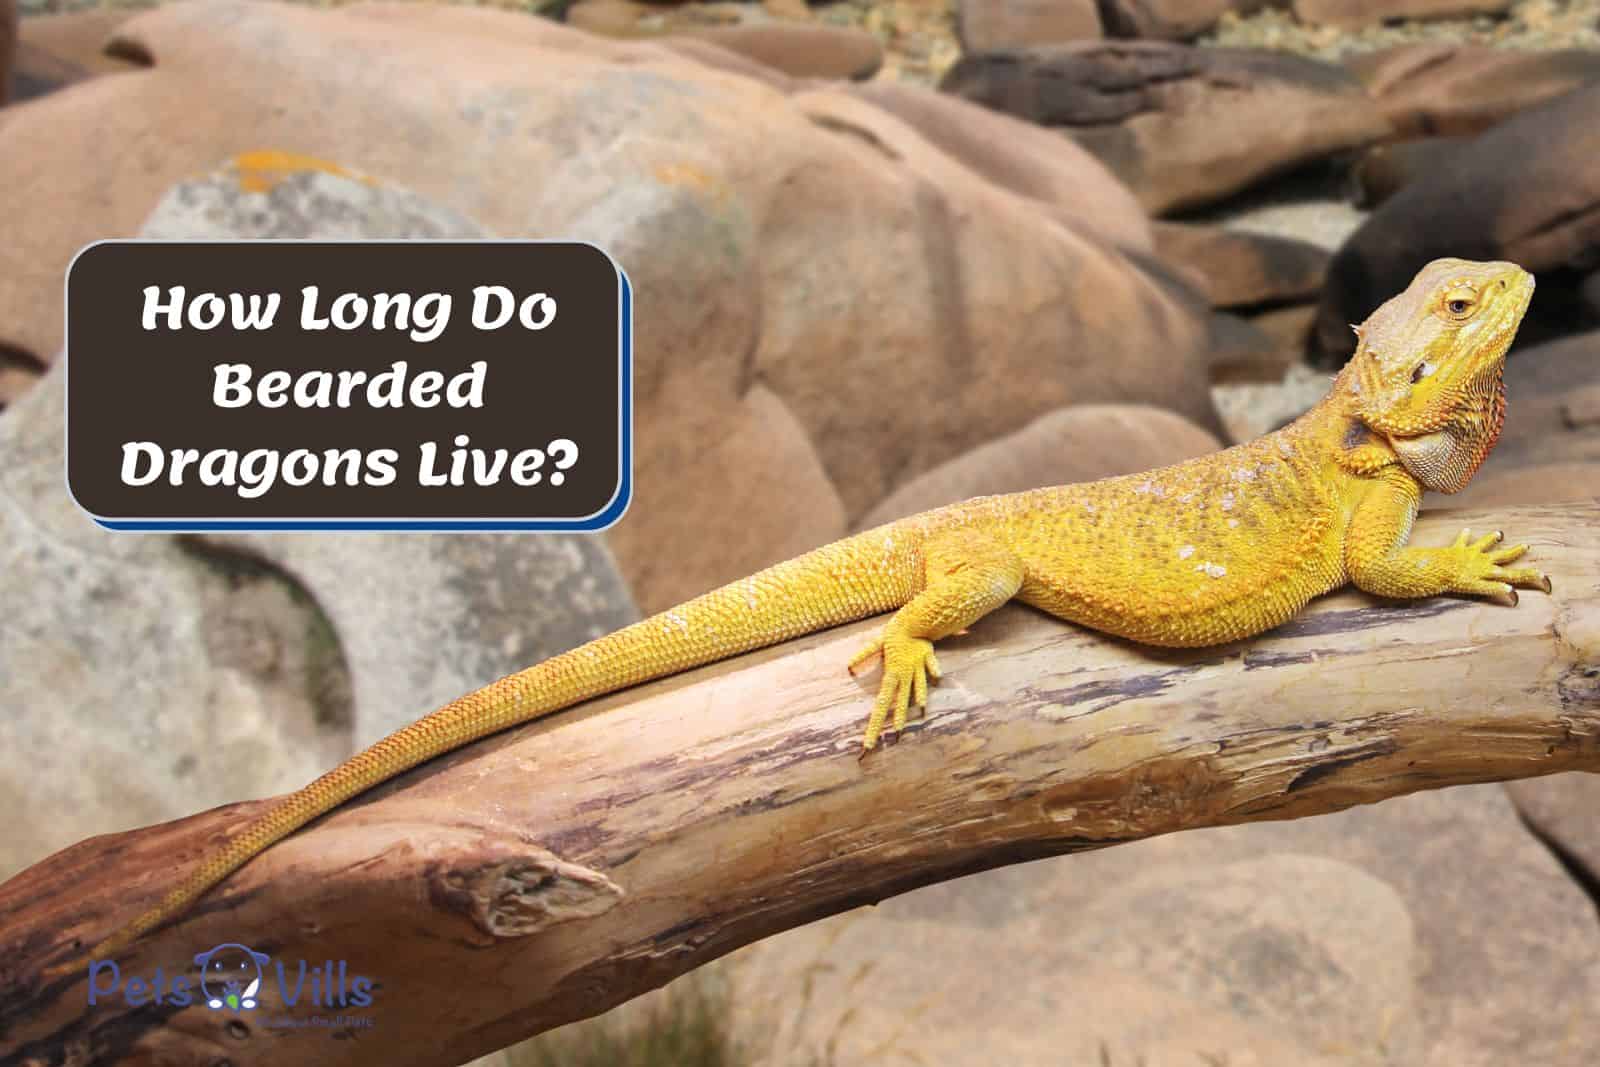 yellow bearded dragon crawling on a wood beside How Long Do Bearded Dragons Live? text